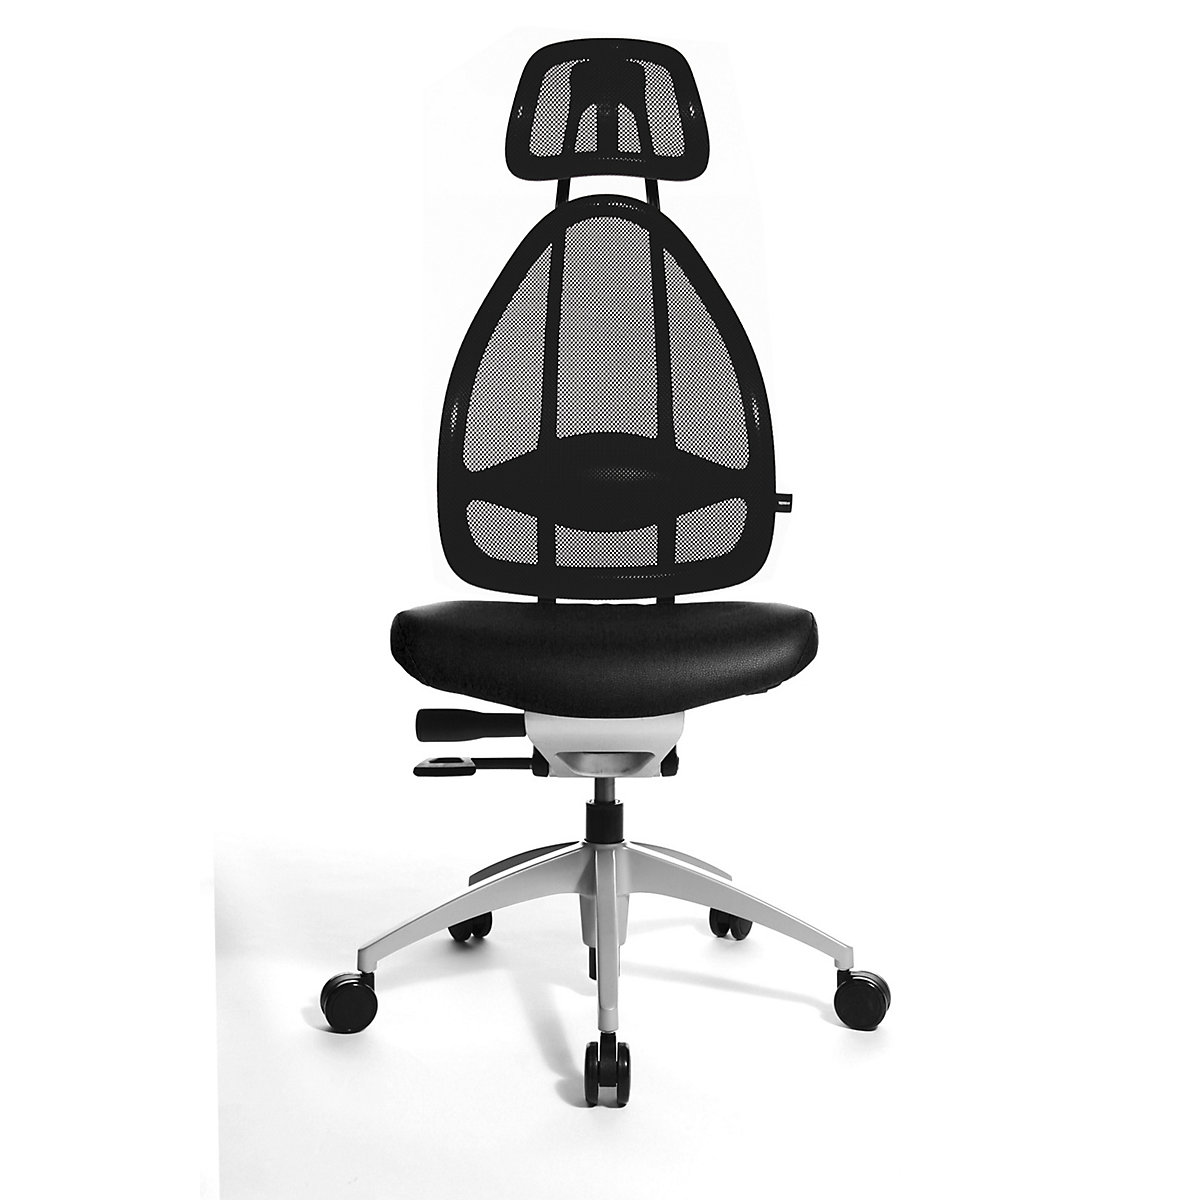 Designer office swivel chair, with head rest and mesh back rest - Topstar